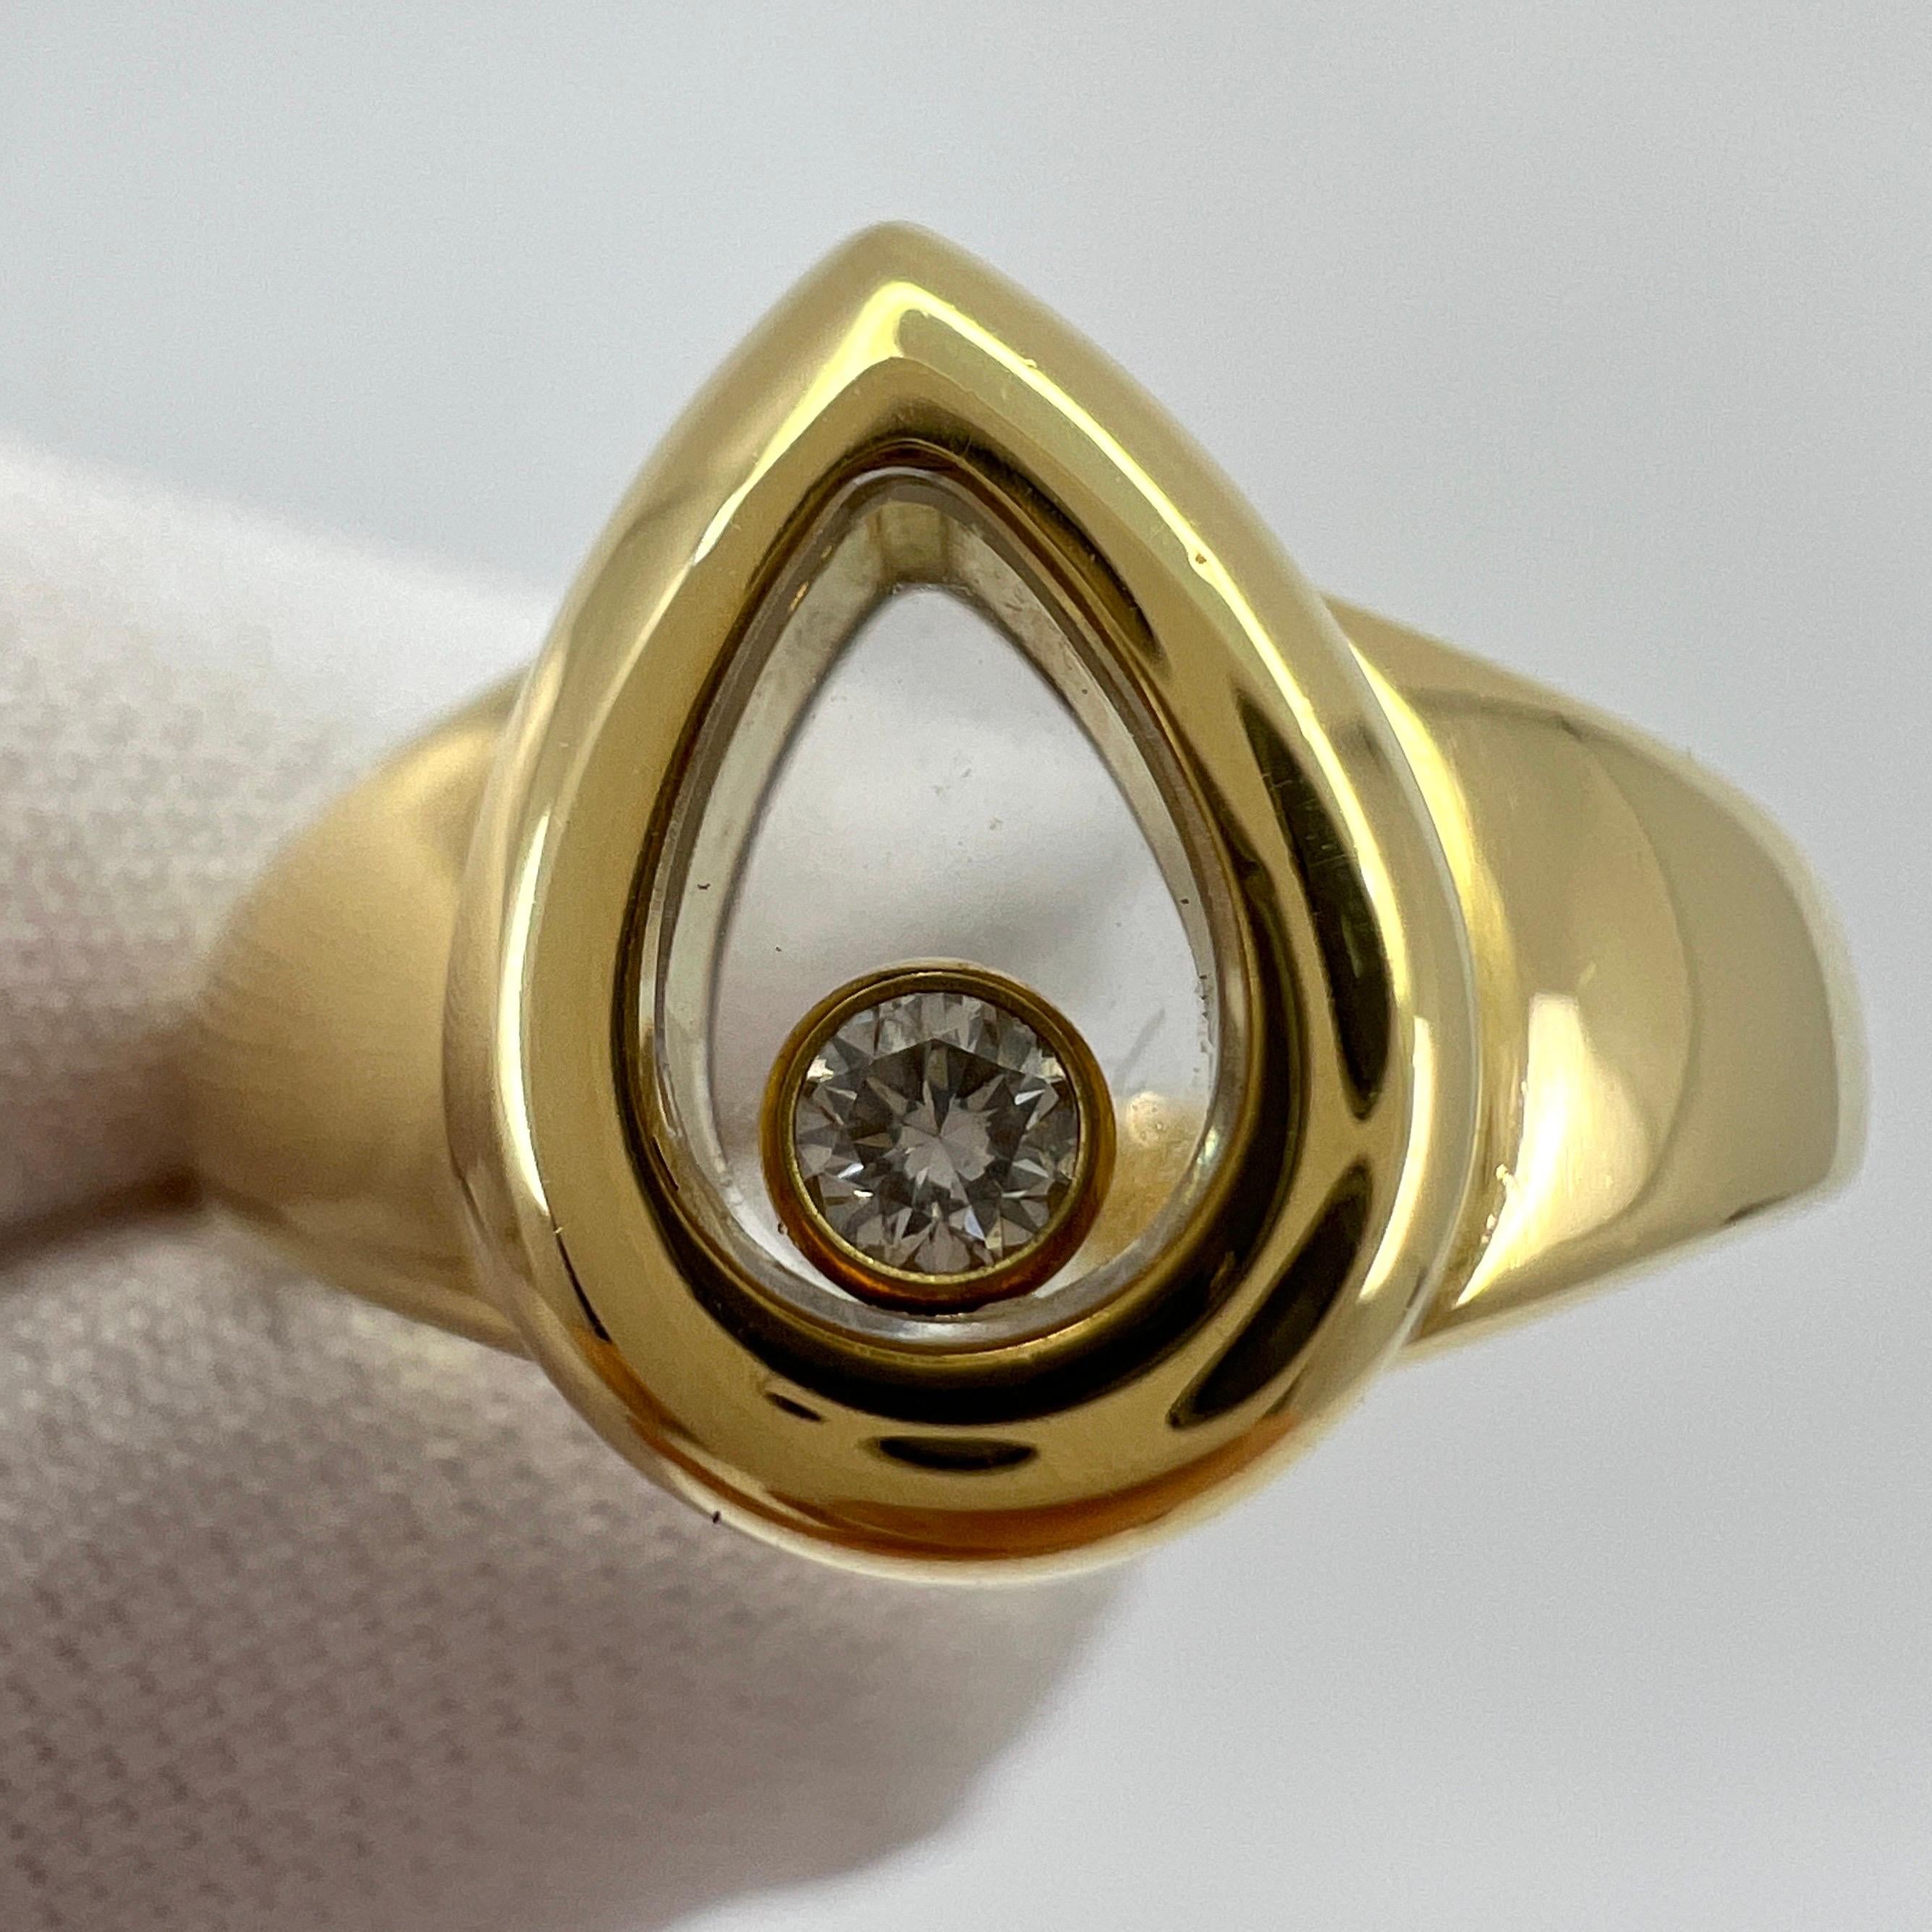 Rare Vintage Chopard Happy Diamonds Pear Shape 18k Yellow Gold Ring. 

Inspired by drops of water, Chopard's Happy Diamonds collection features diamonds that are free to swirl gracefully behind sapphire crystal glass, enhancing their sparkle with